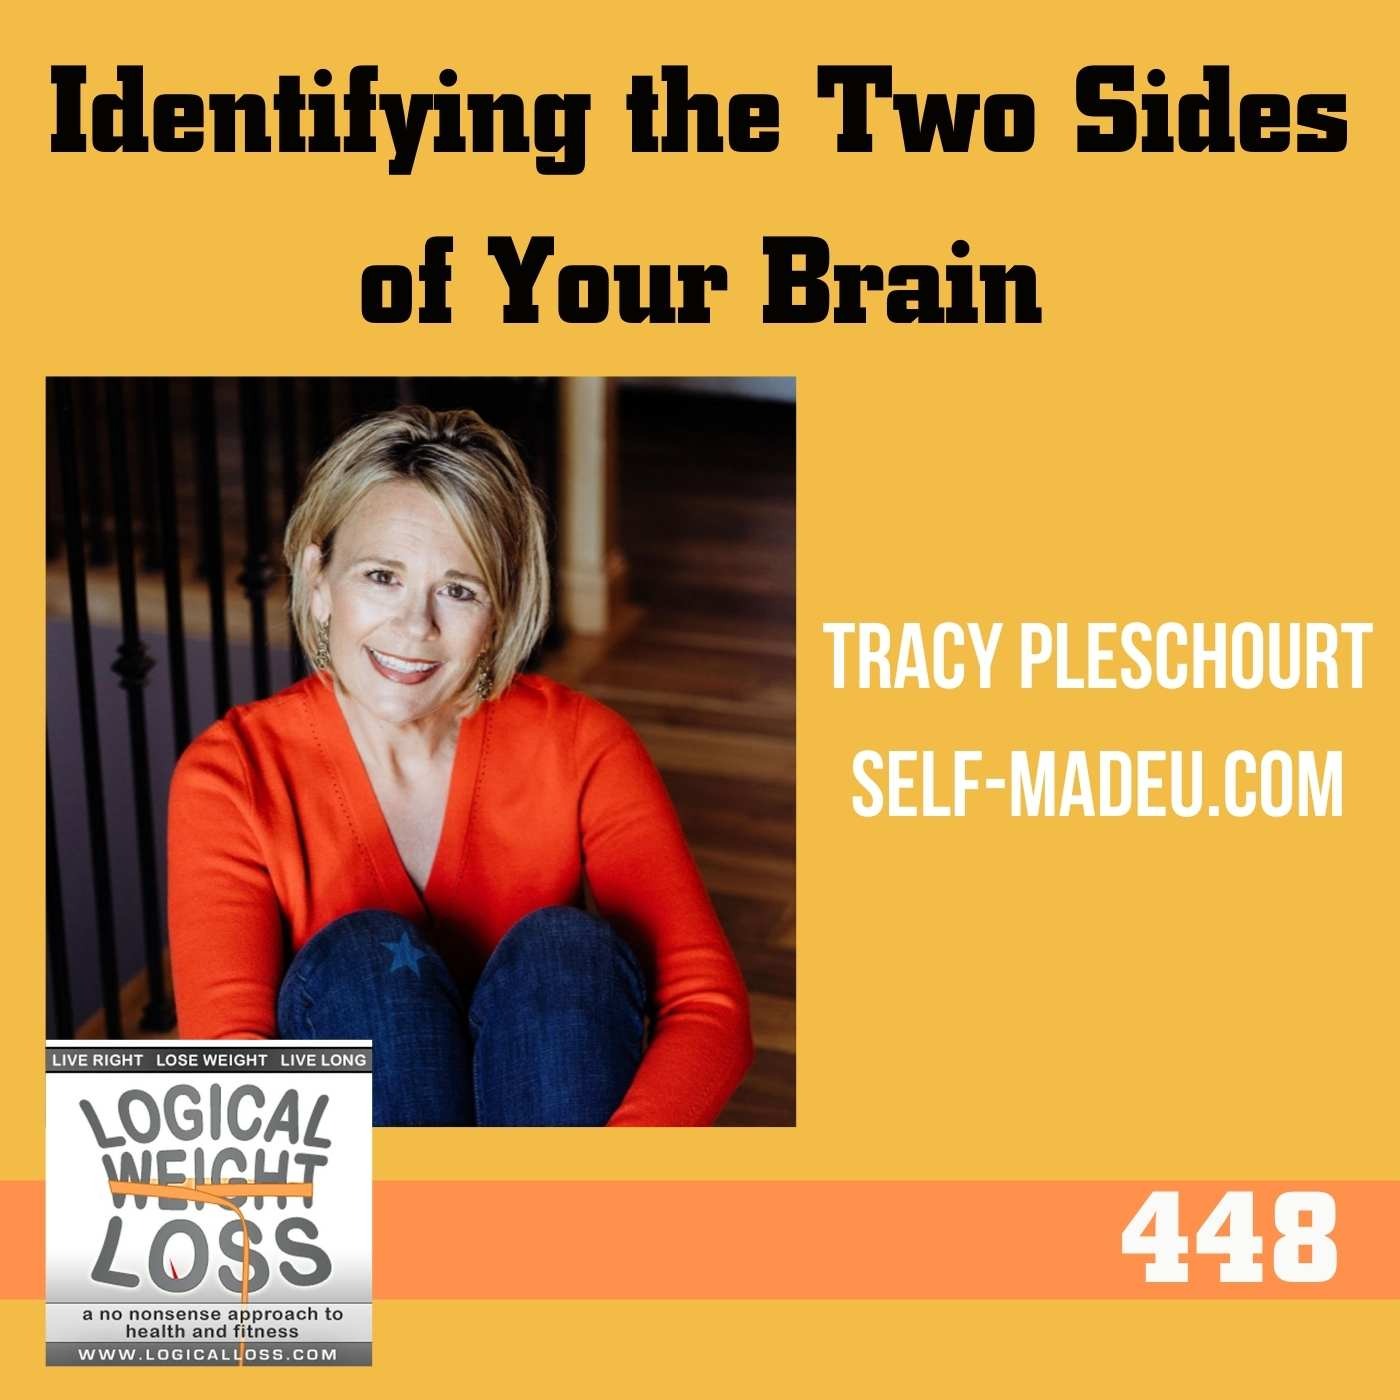 Identifying the Two Sides of Your Brain - Tracy Pleschourt Image